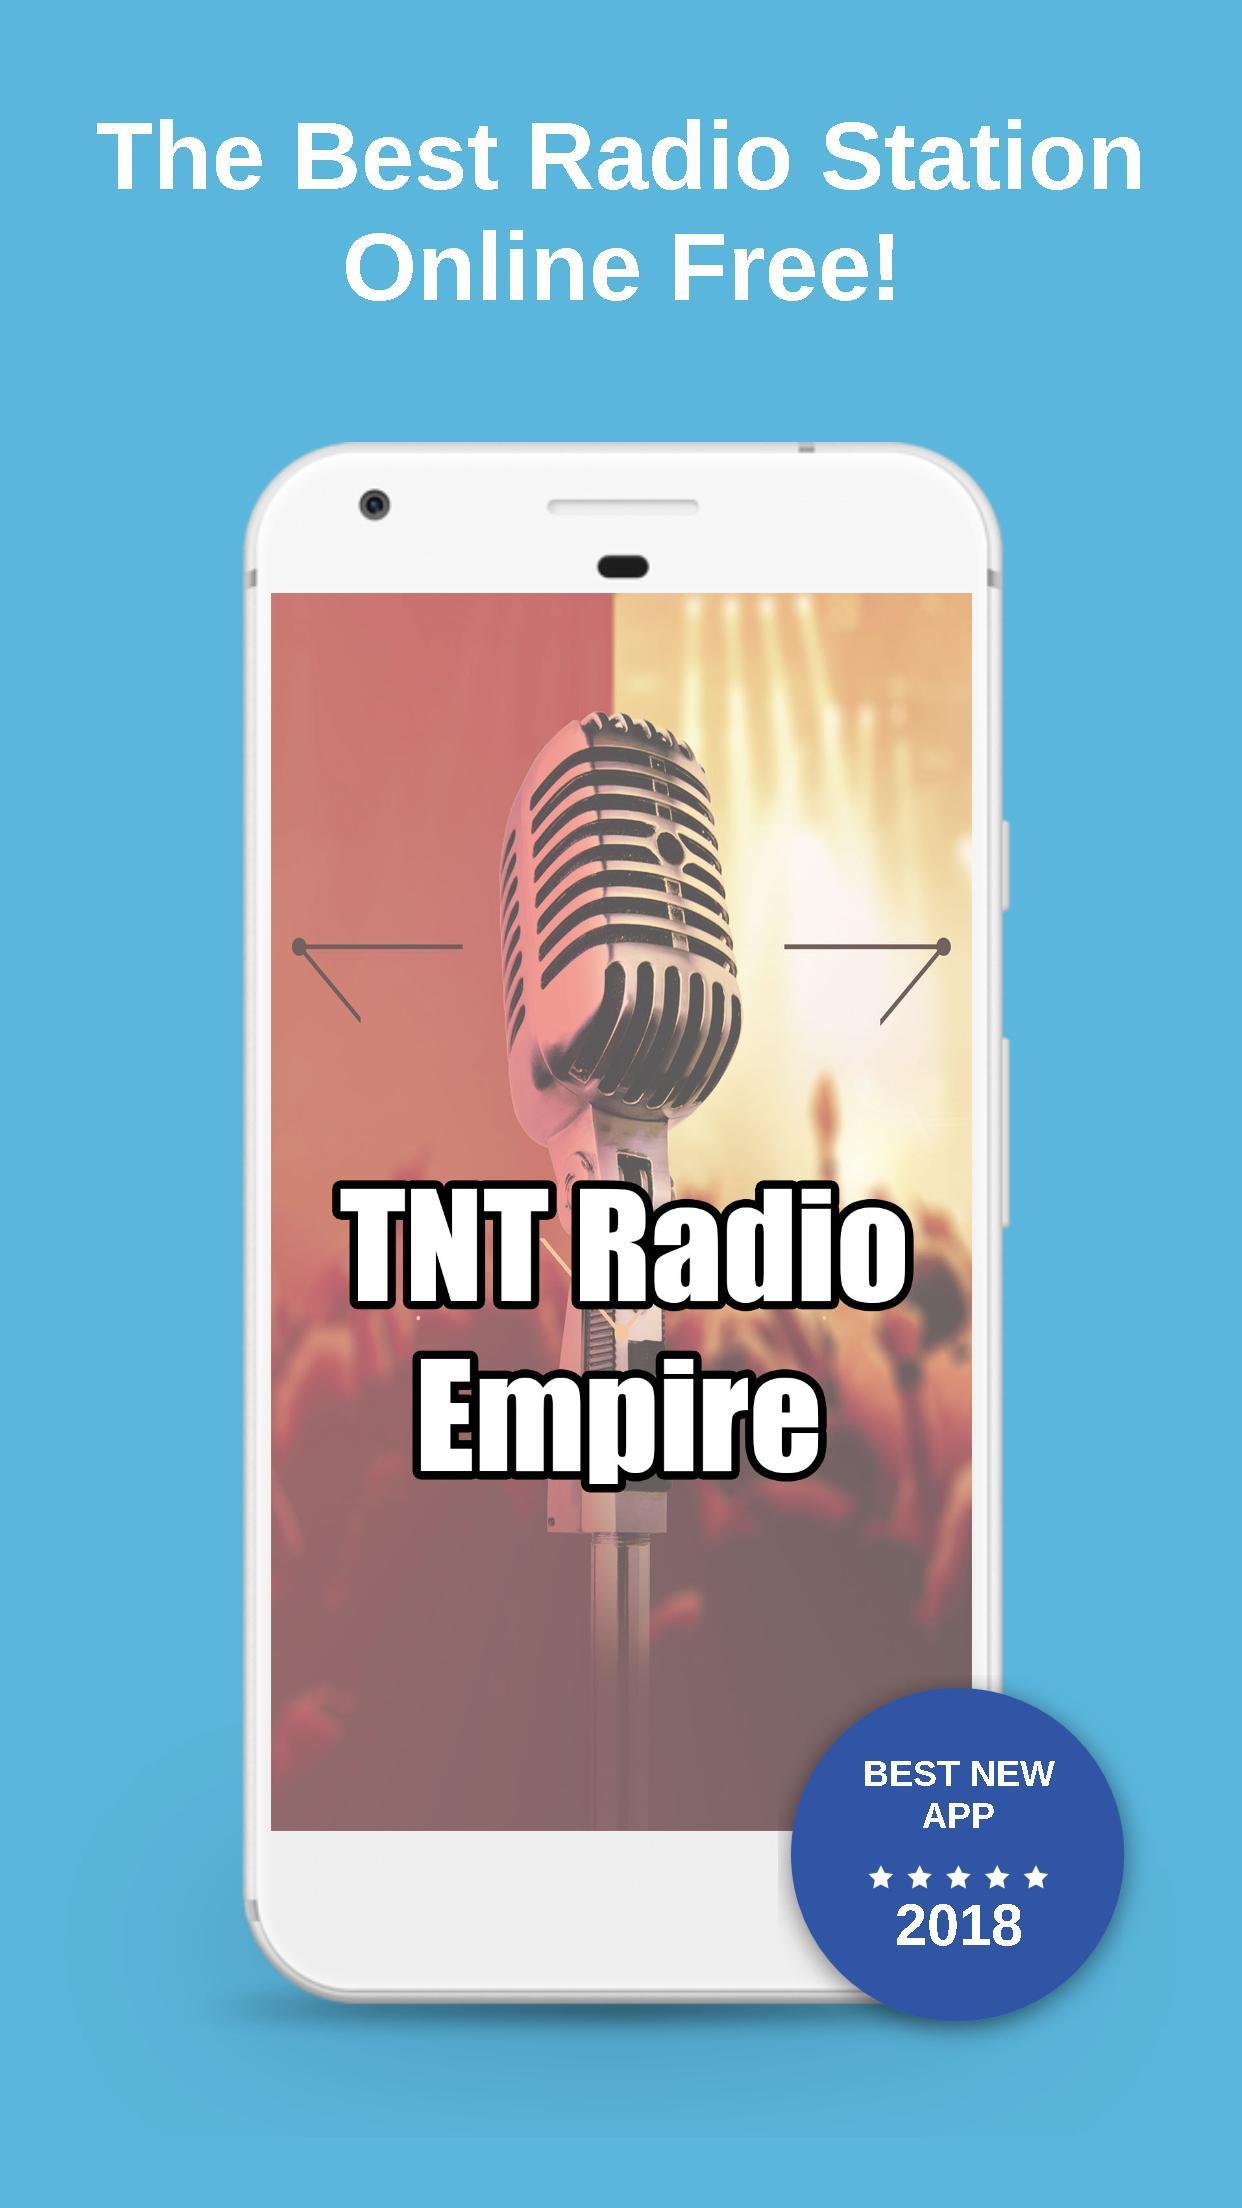 TNT radio empire Online App USA free listen for Android - APK Download